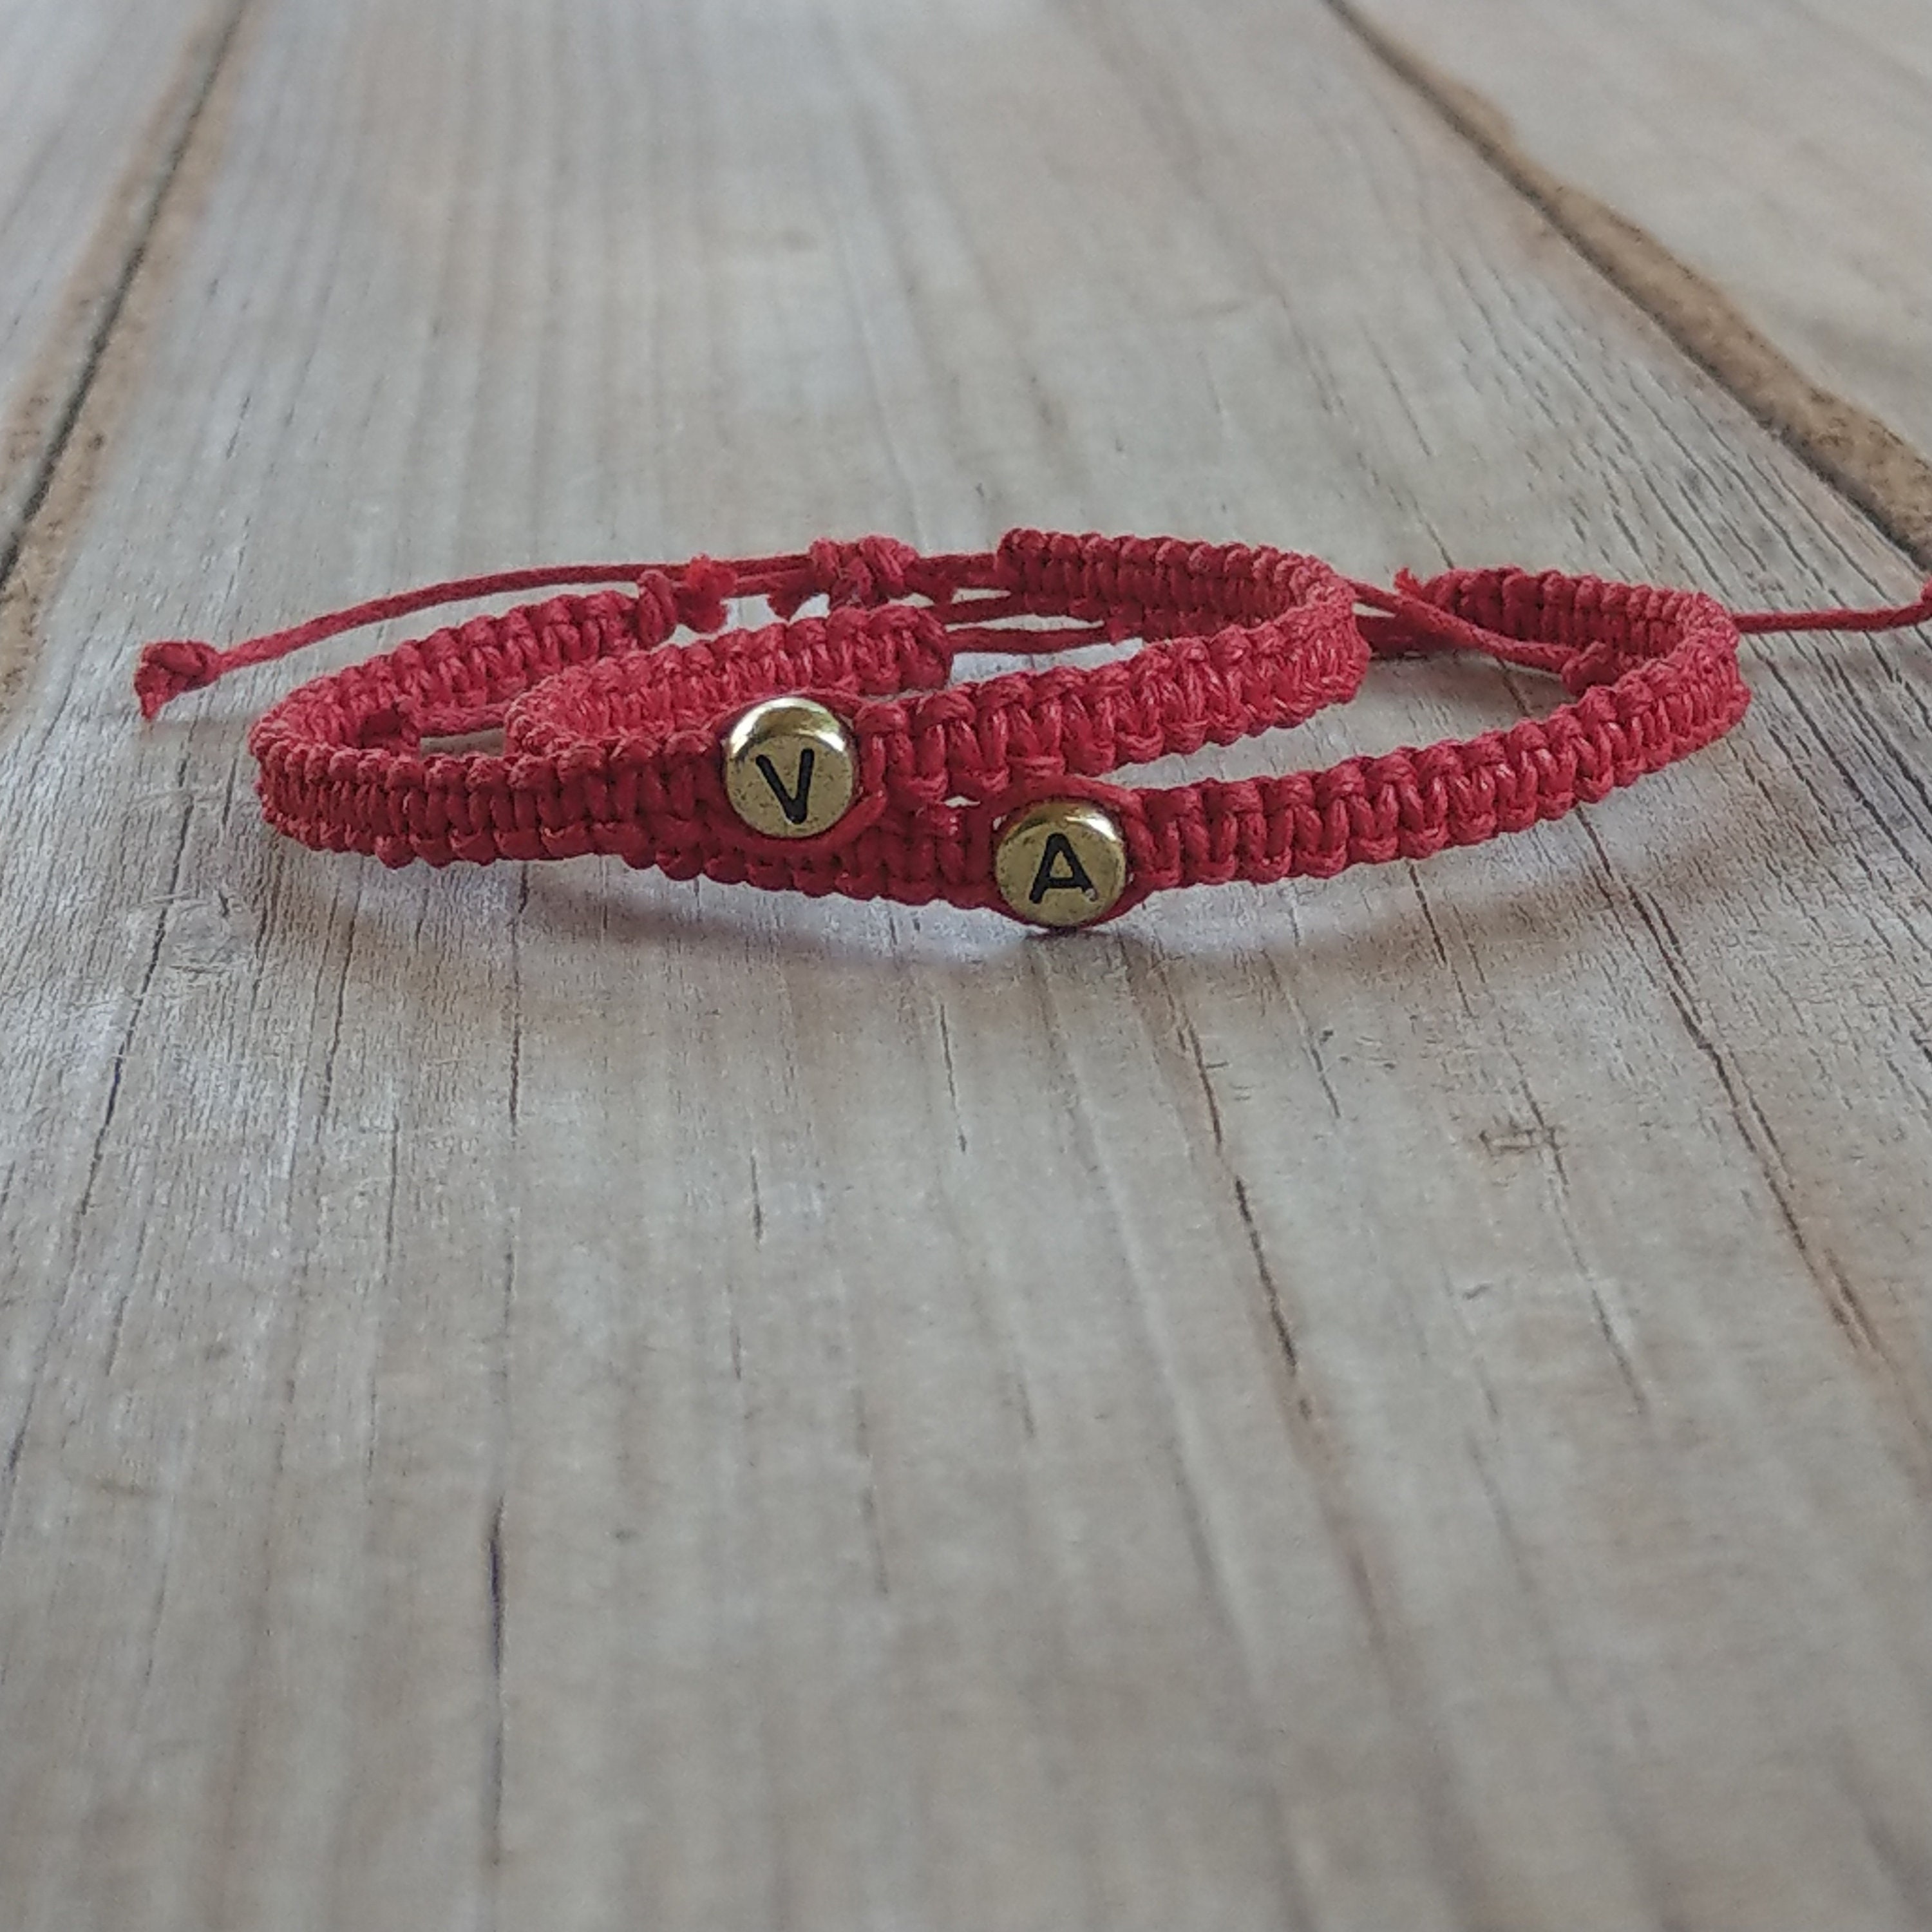 XIAQUJ Personalized 26 in itial Bracelet Gold Plated Letter Woven Bracelet  Heart Charm Red Bracelet Woven Red Bracelet for Men Women Girls Bracelets H